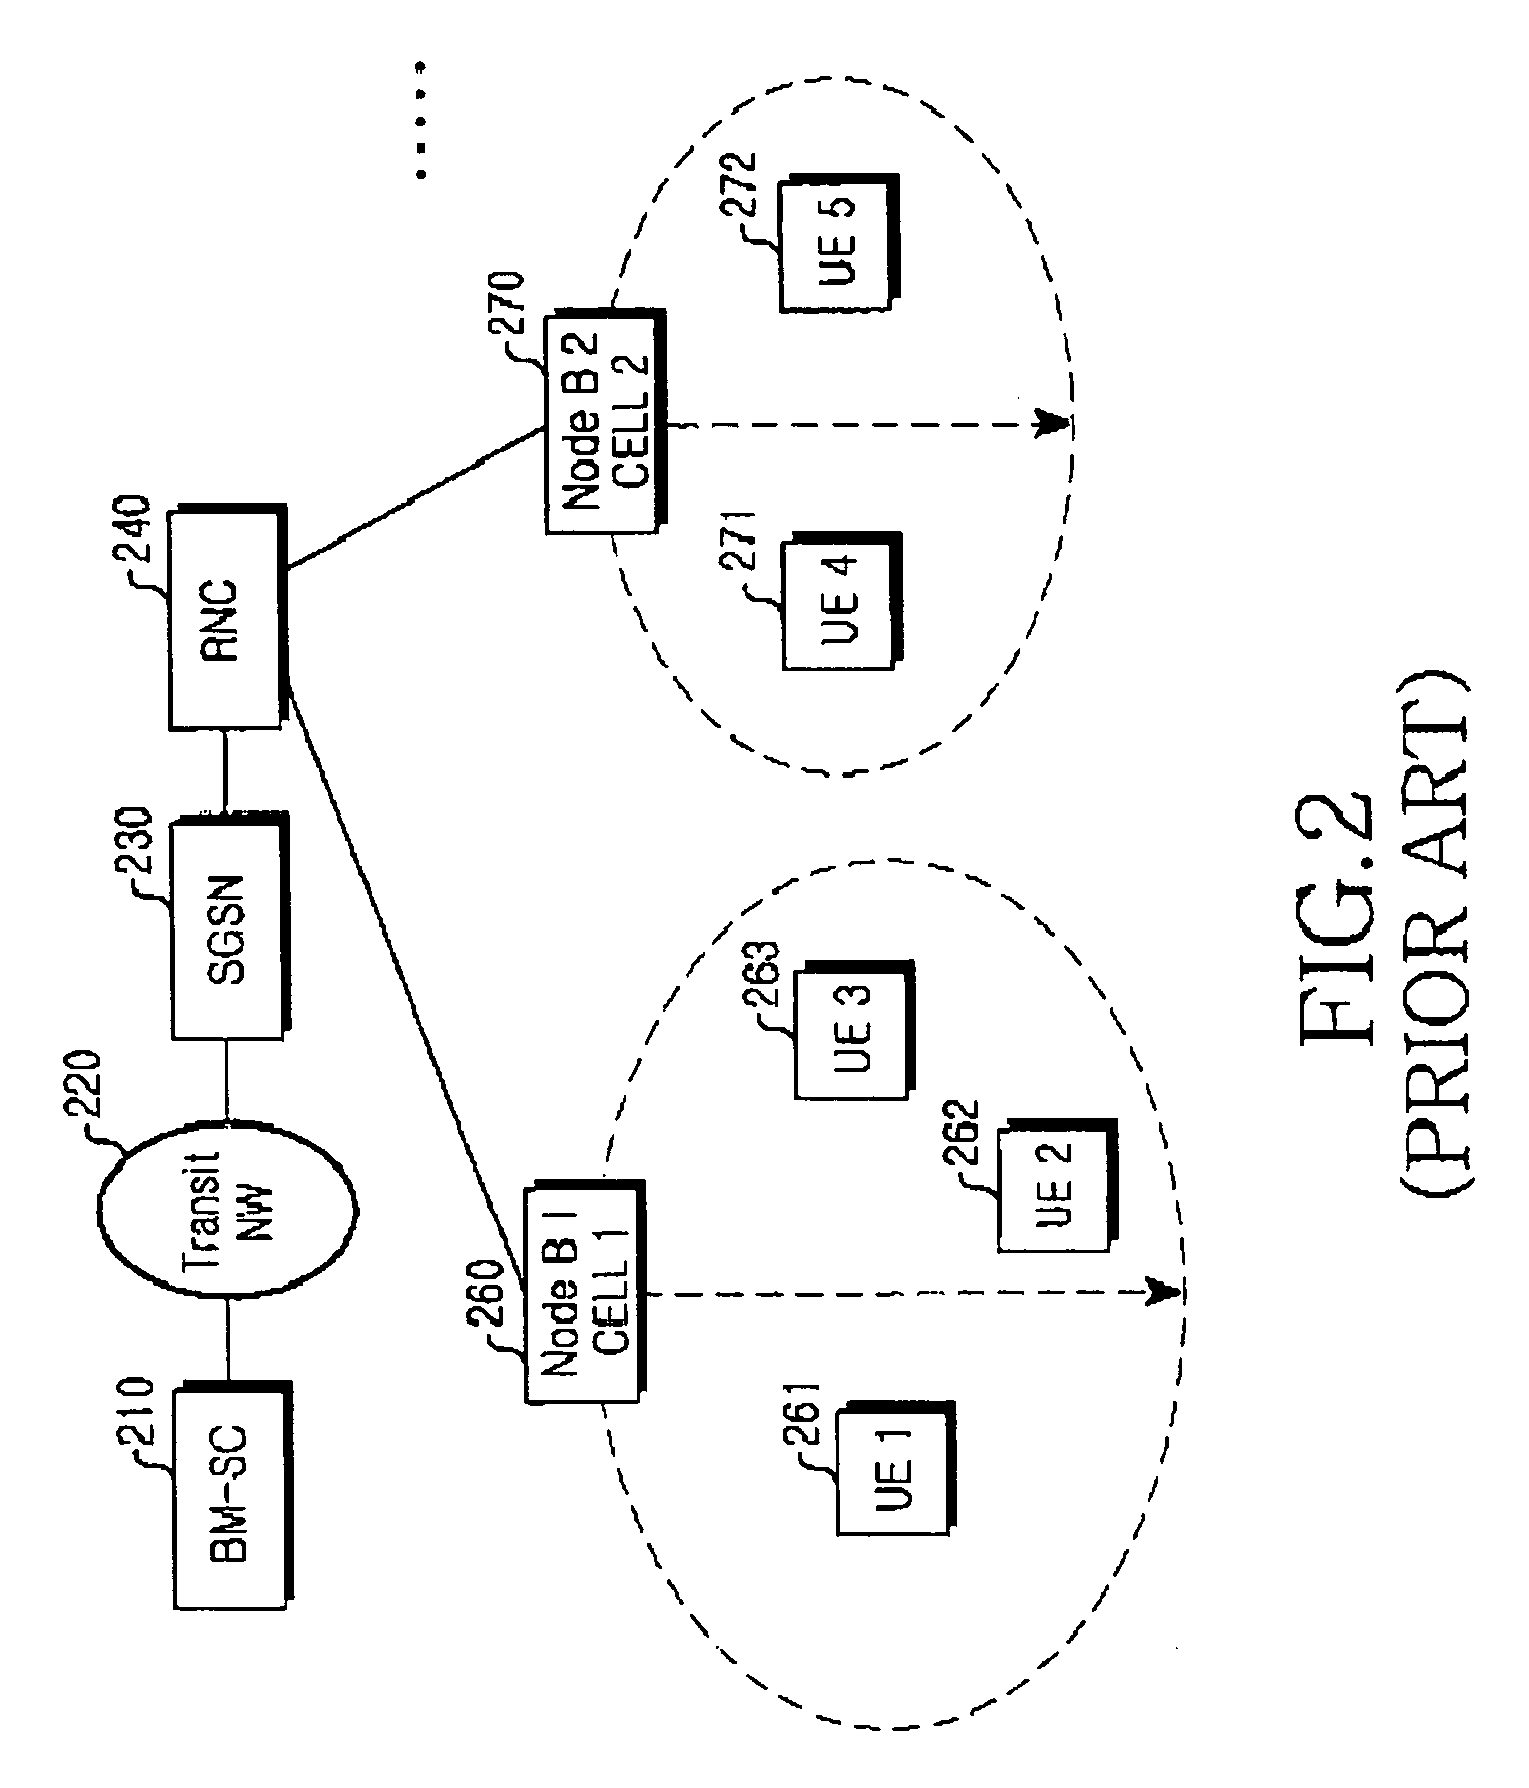 Cell reselection method for receiving packet data in a mobile communication system supporting MBMS